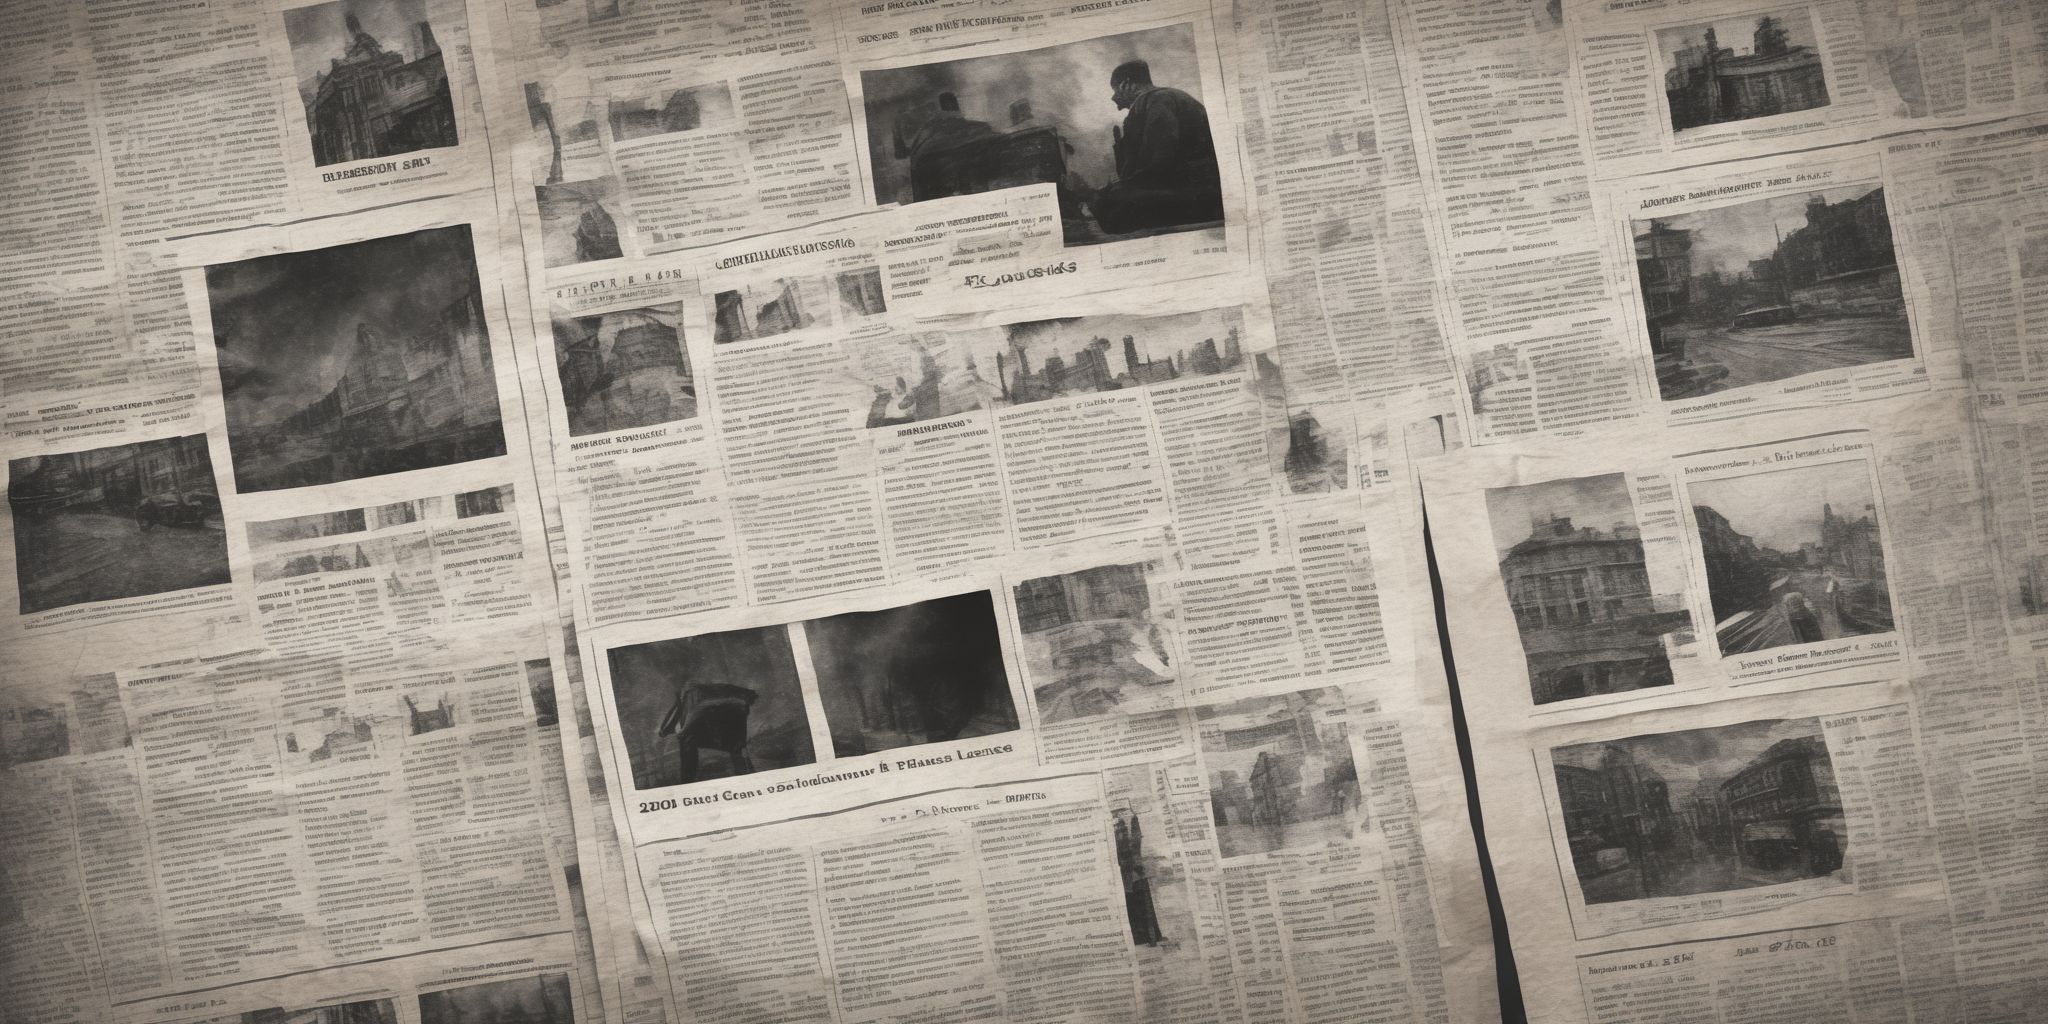 Newspaper  in realistic, photographic style